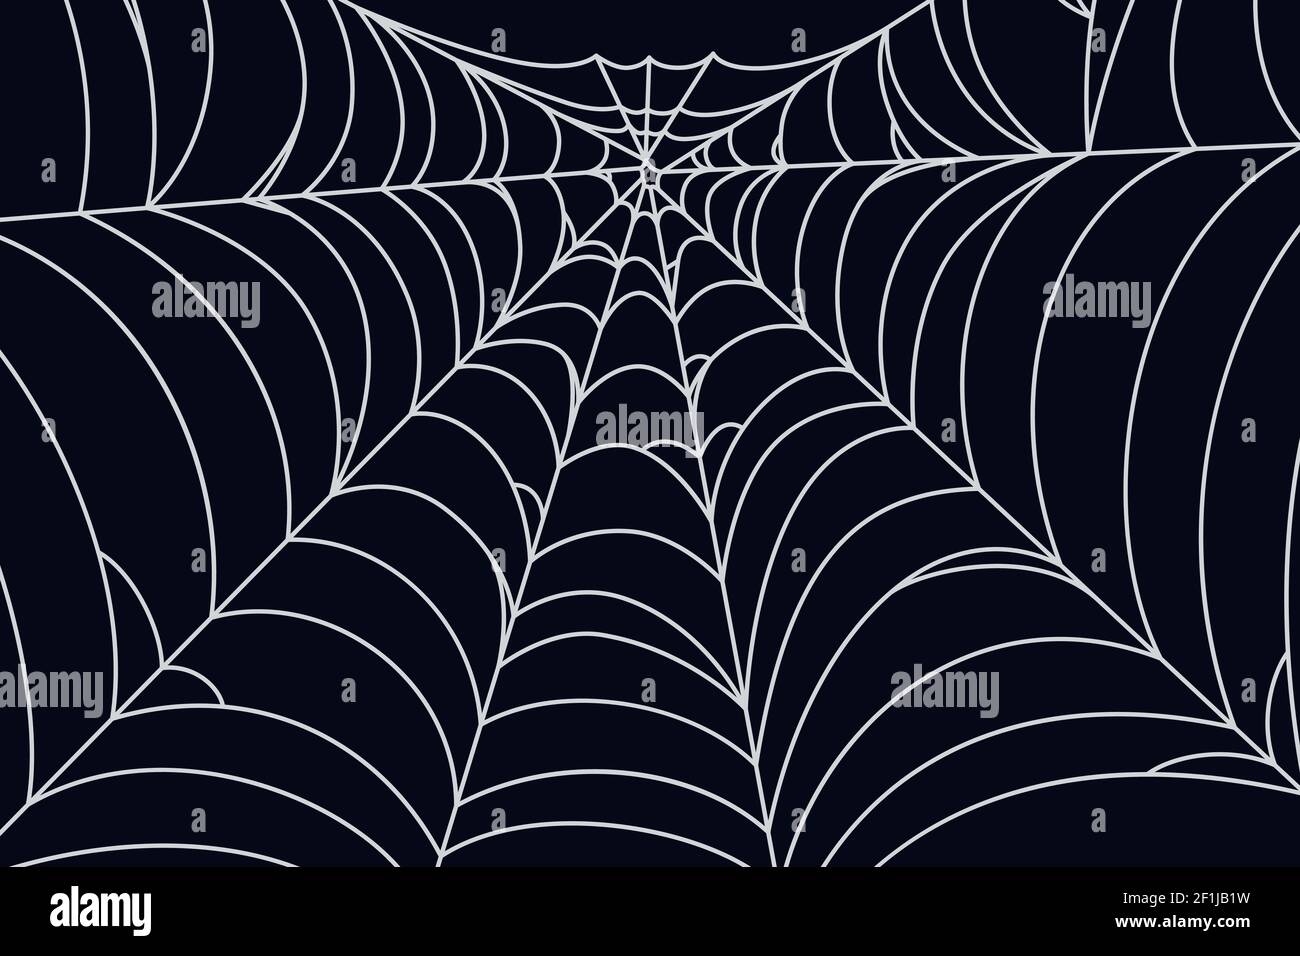 160+ Spider Web HD Wallpapers and Backgrounds